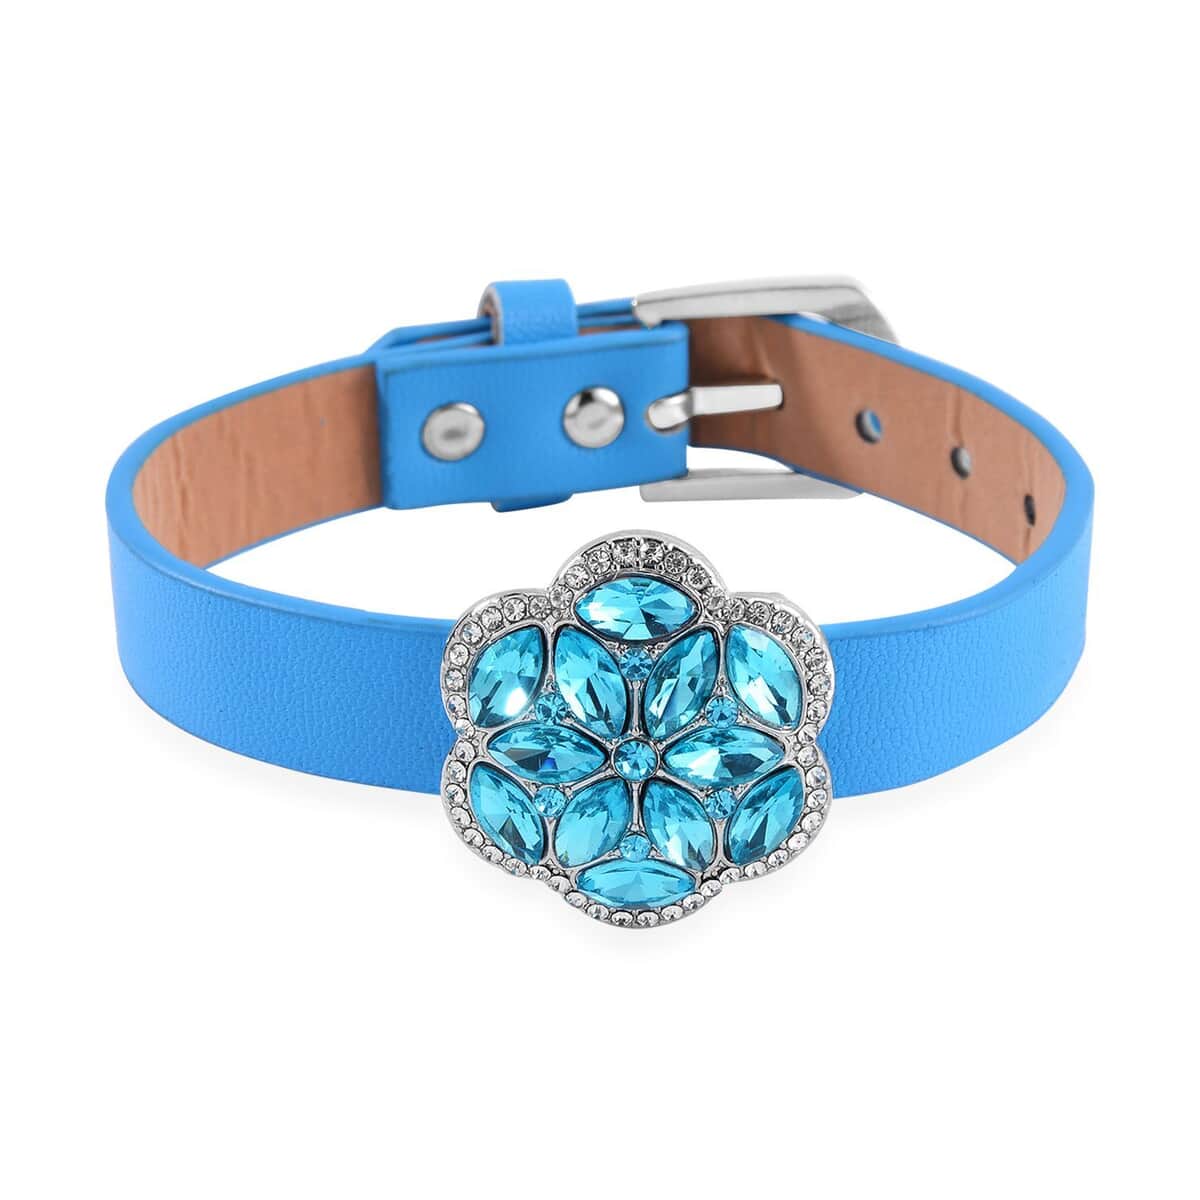 Sky Blue Color and White Austrian Crystal, Faux Leather Floral Bracelet (6-8In), Earrings, Ring (Size 10.0) and Pendant Necklace 20-22 Inches In Silvertone image number 3